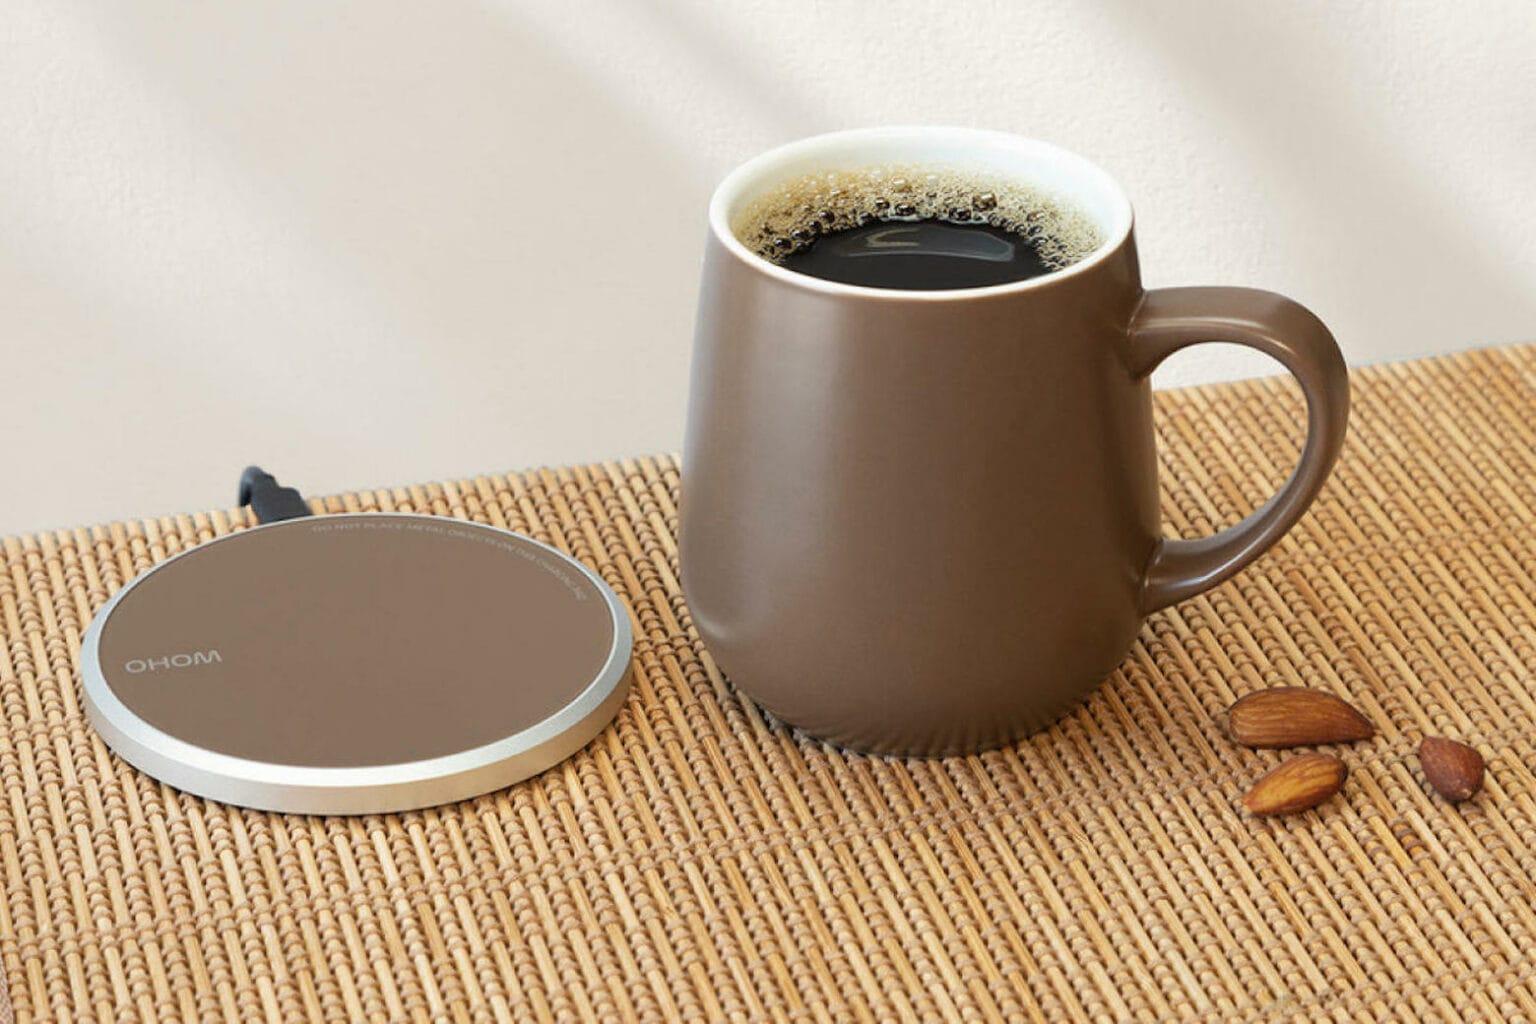 Charge your battery and keep your cup warm with this 2-in-1.